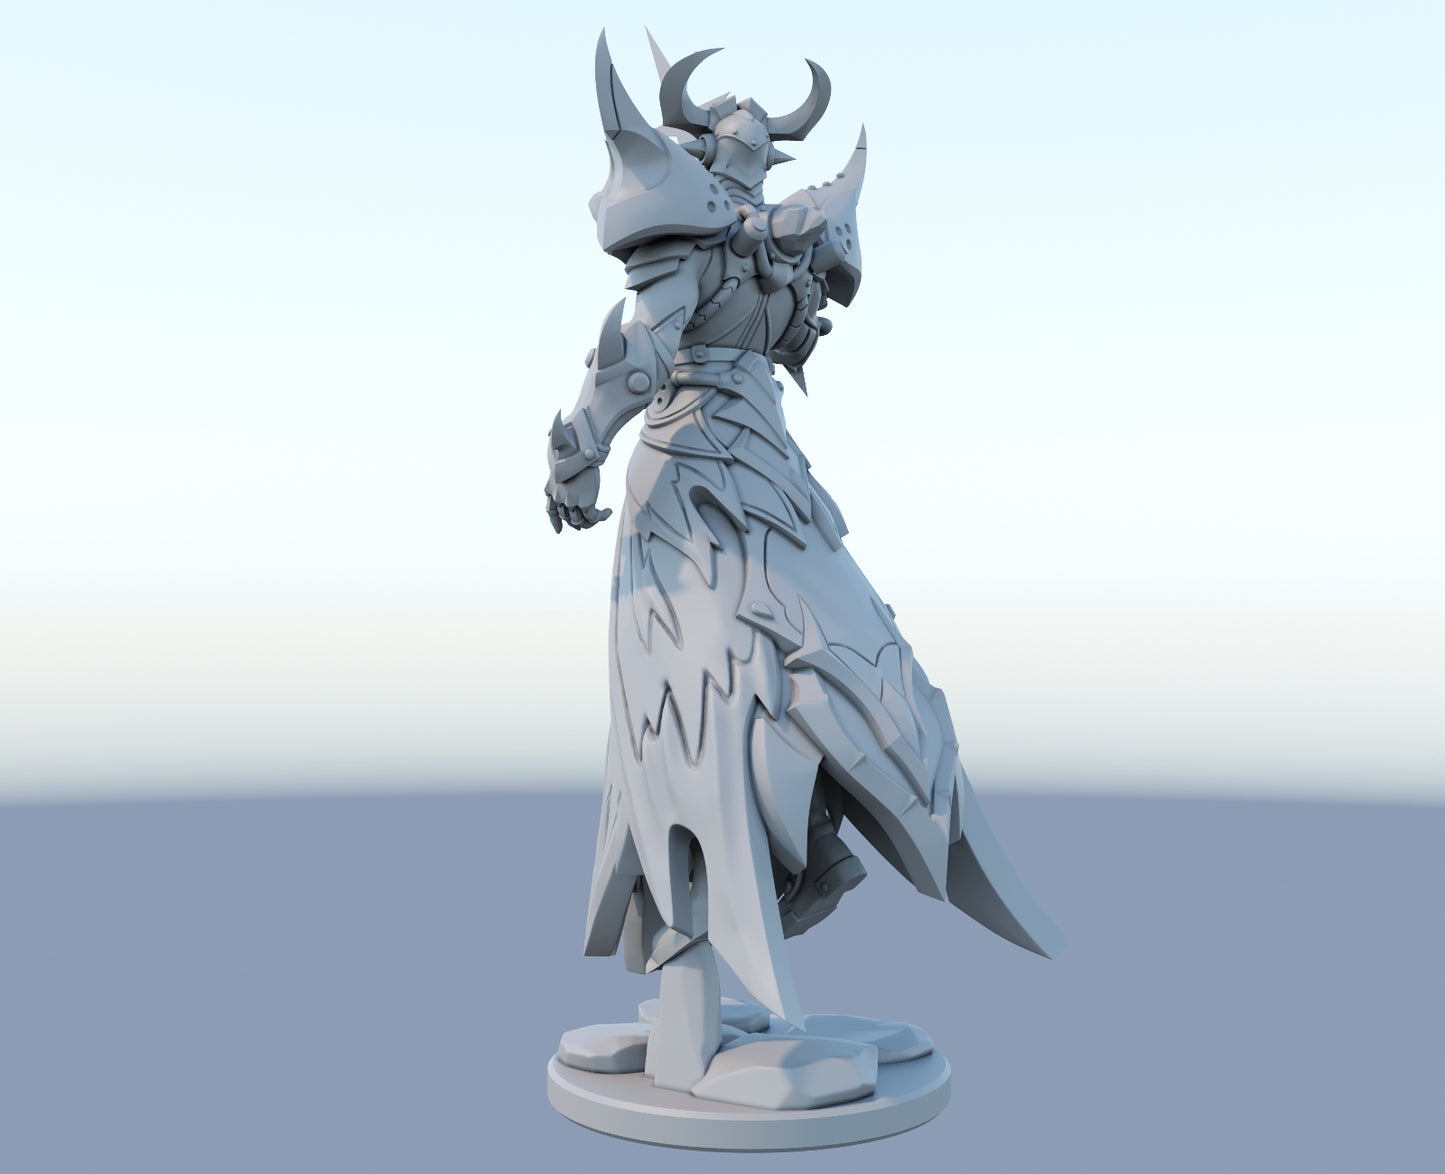 Kassadin 3D-printed League of Legends champion figure. Decorate your gaming setup or home with your favorite League of Legends champion! Choose between the unpainted version, perfect for you to paint yourself, or the hand-painted version by a professional painter. Order your figure today!